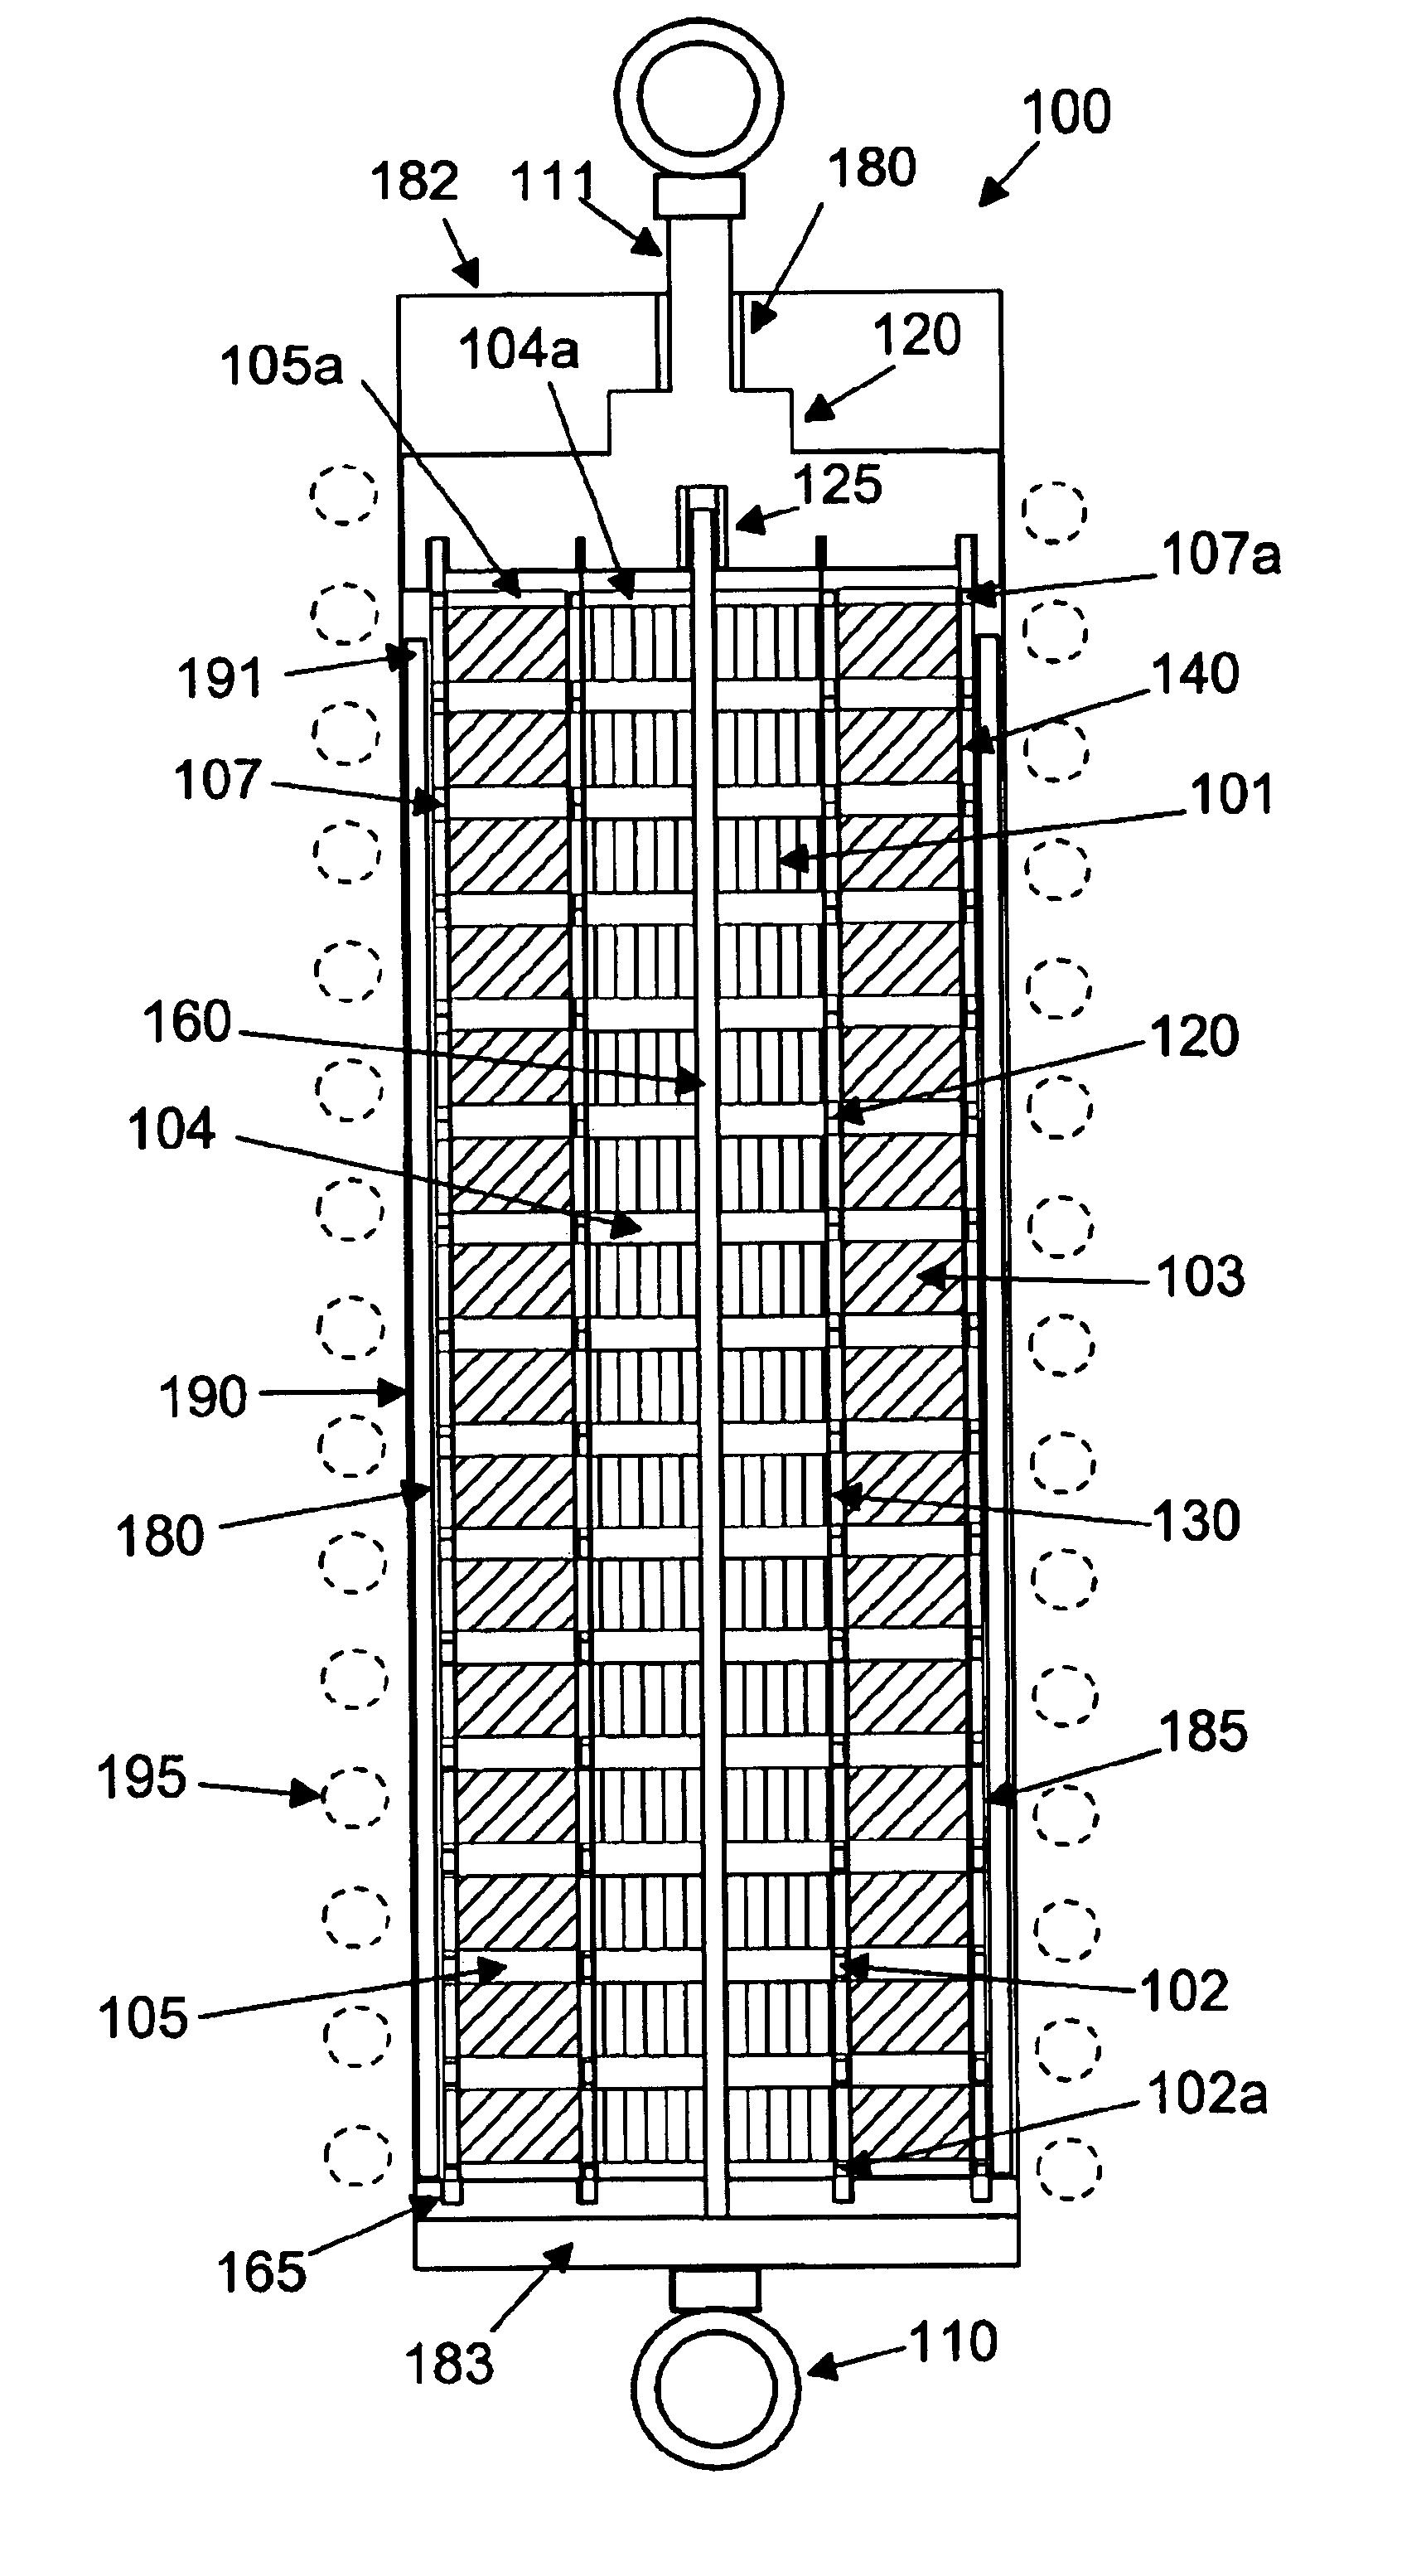 Electromagnetic linear generator and shock absorber